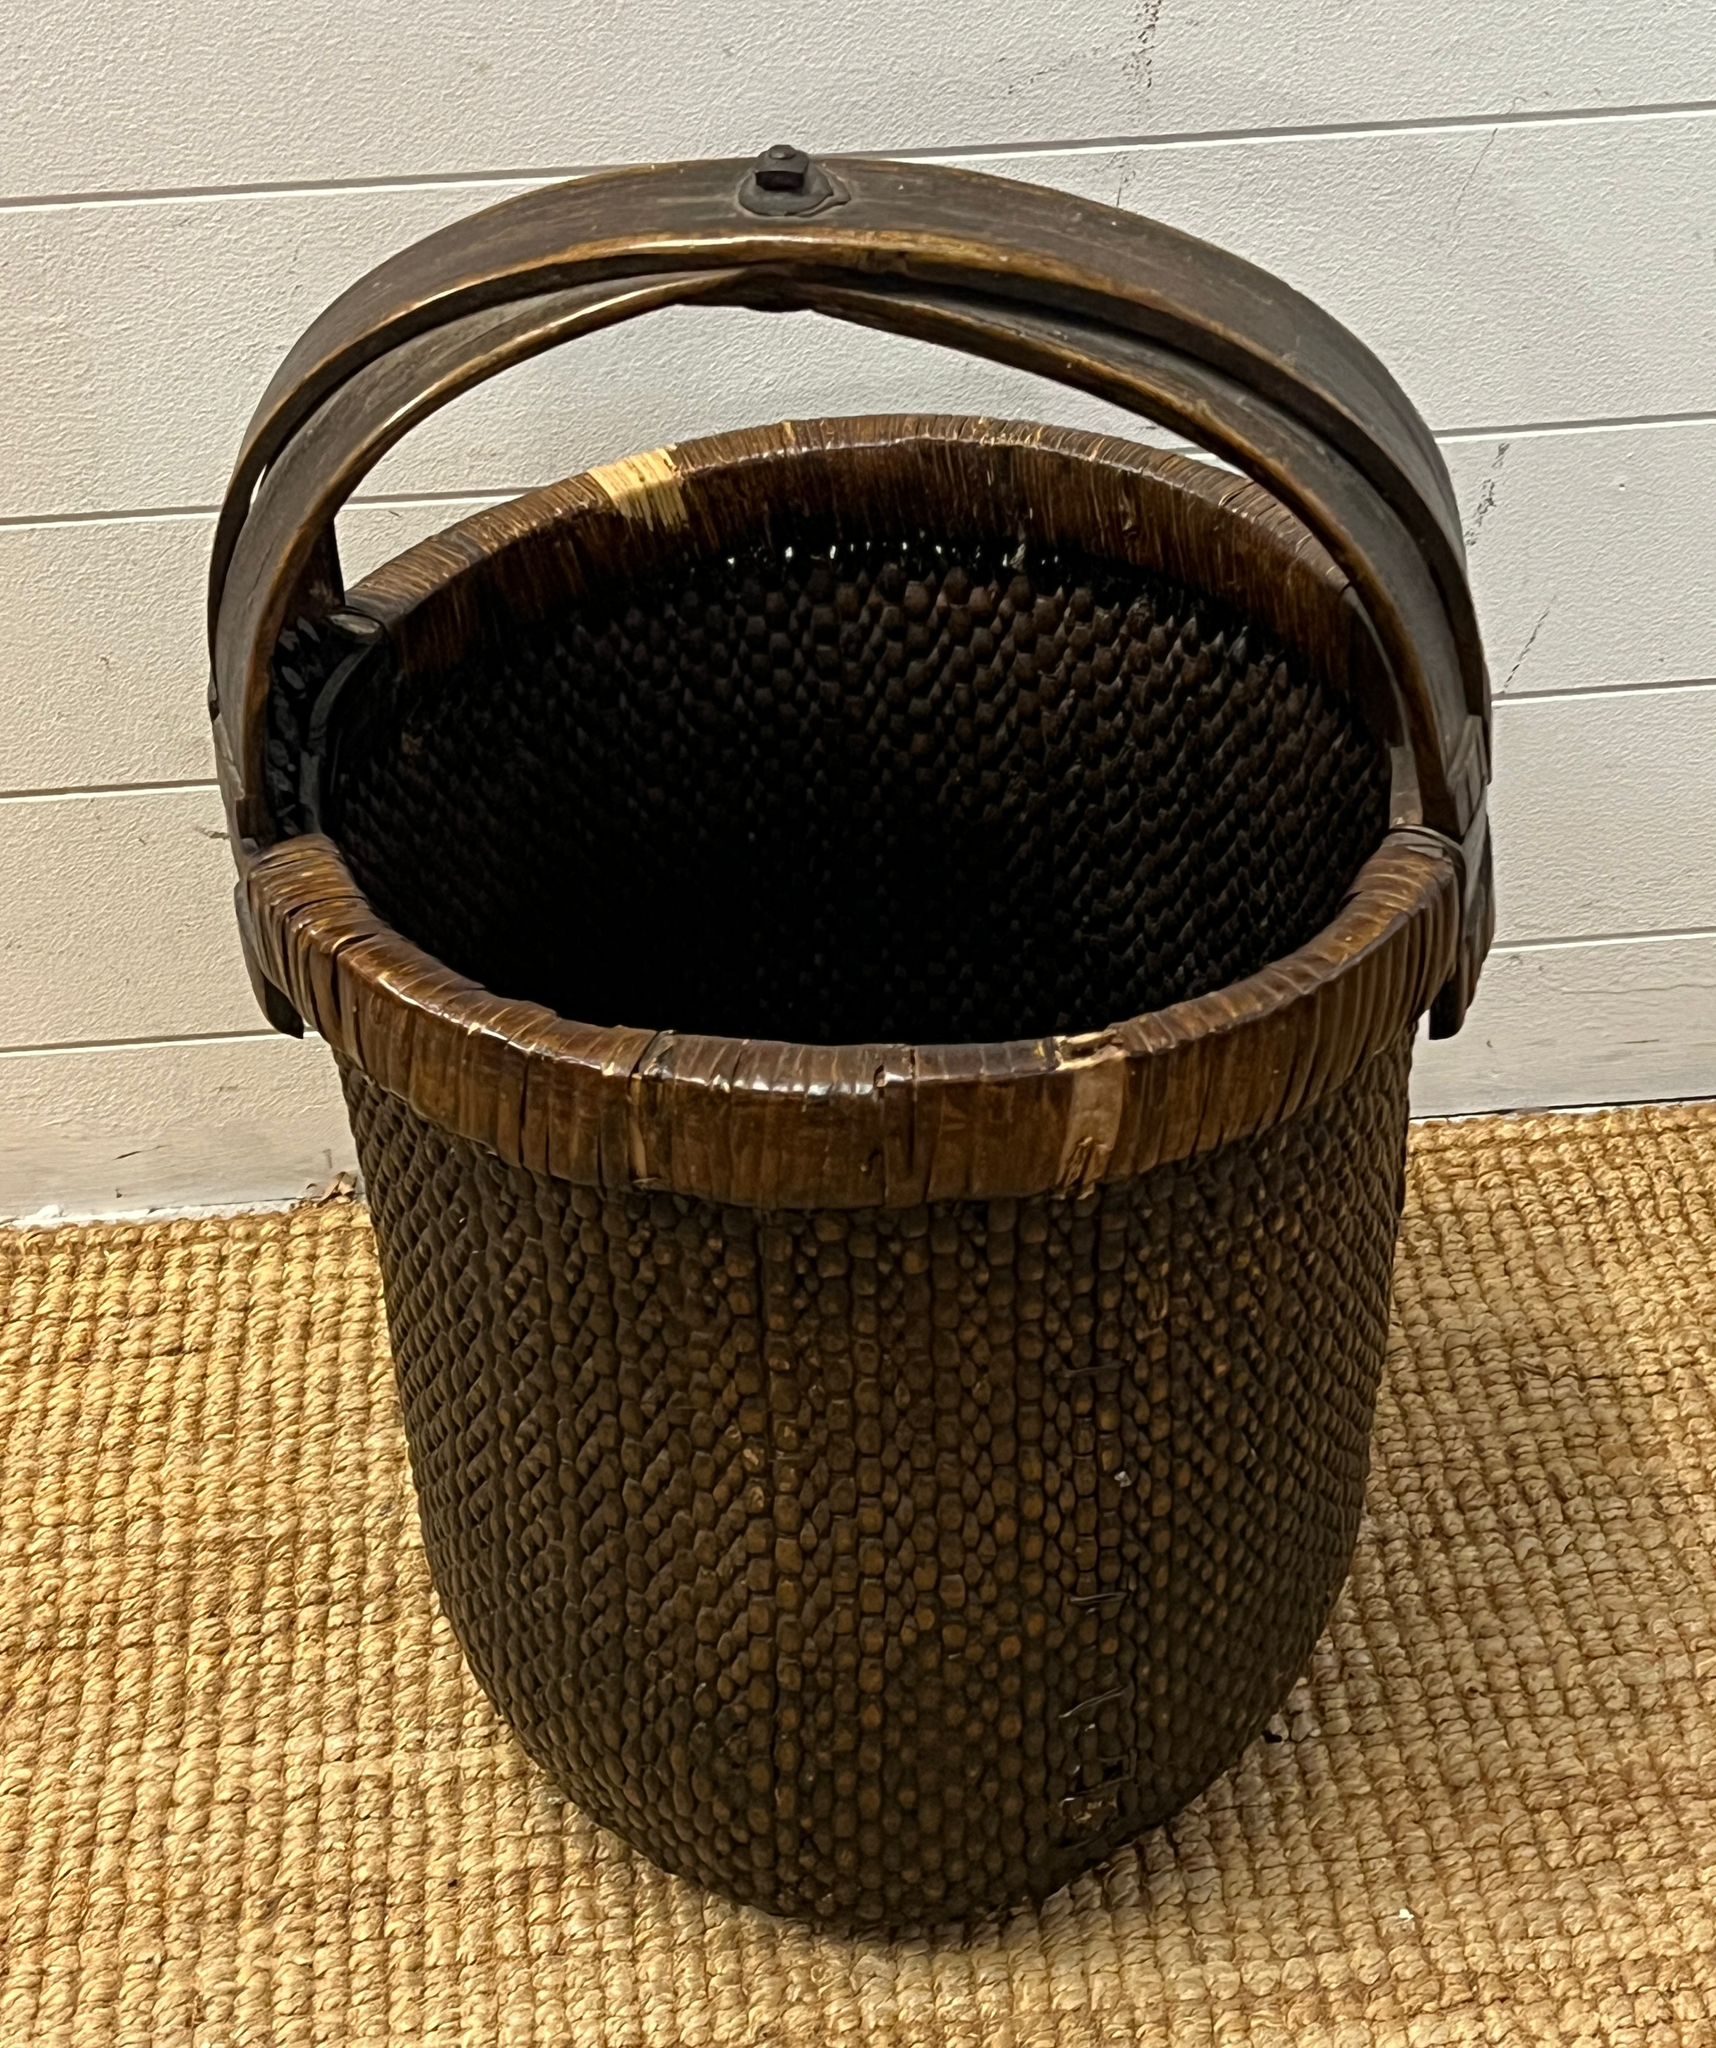 A Chinese woven carrying basket - Image 2 of 3